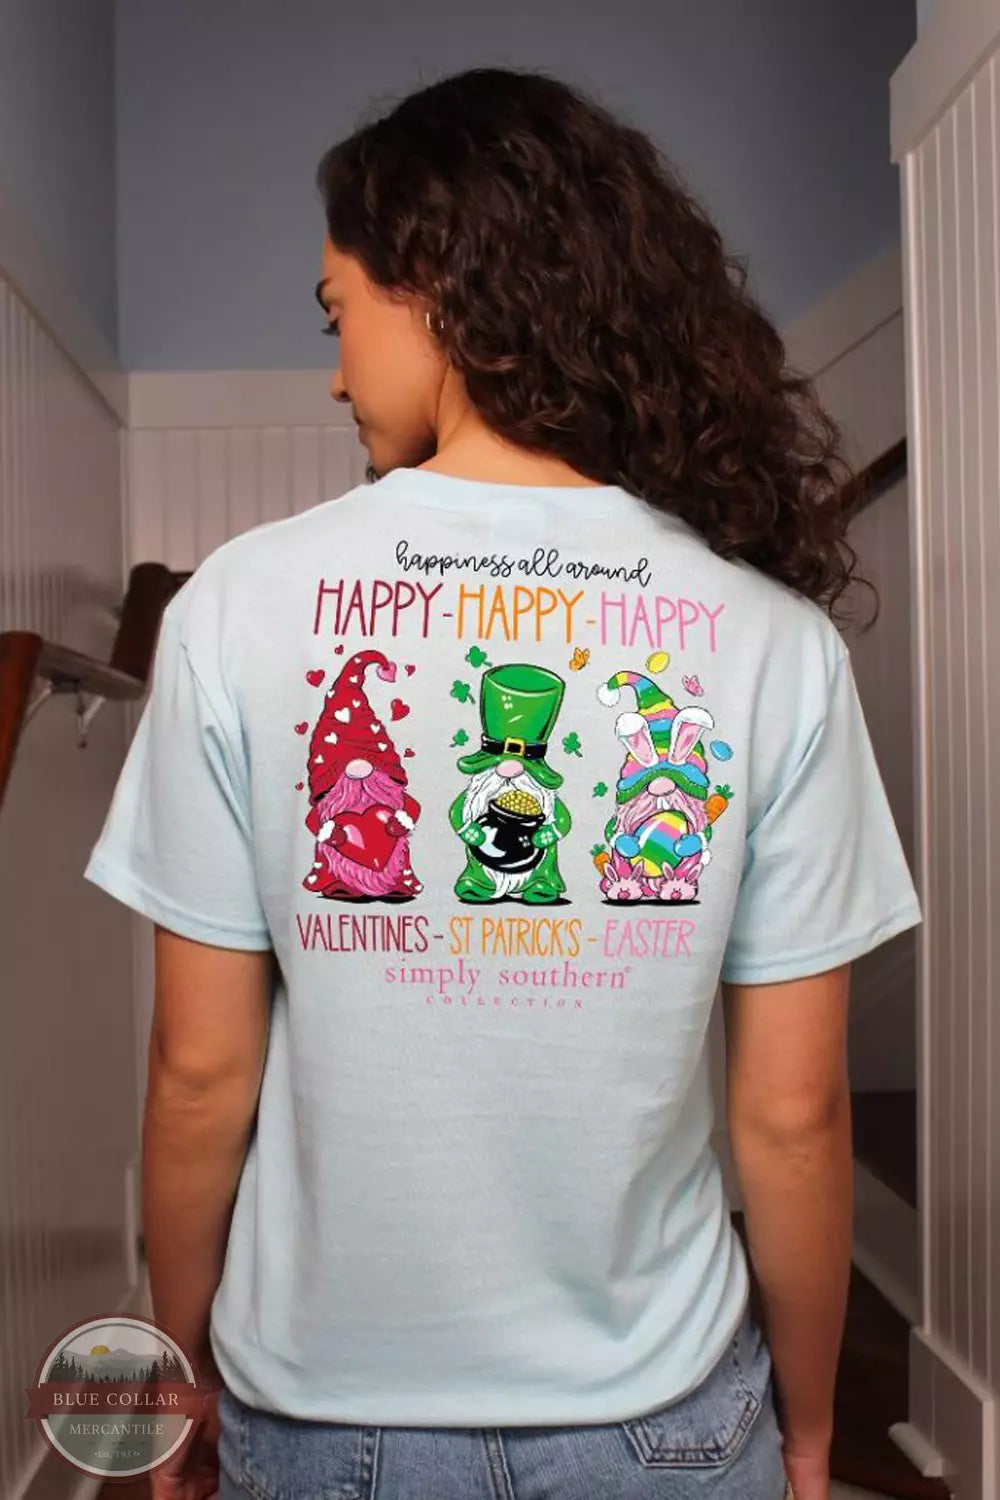 Simply Southern SS-HAPPY-ICE Happiness All Around Short Sleeve T-Shirt Life View